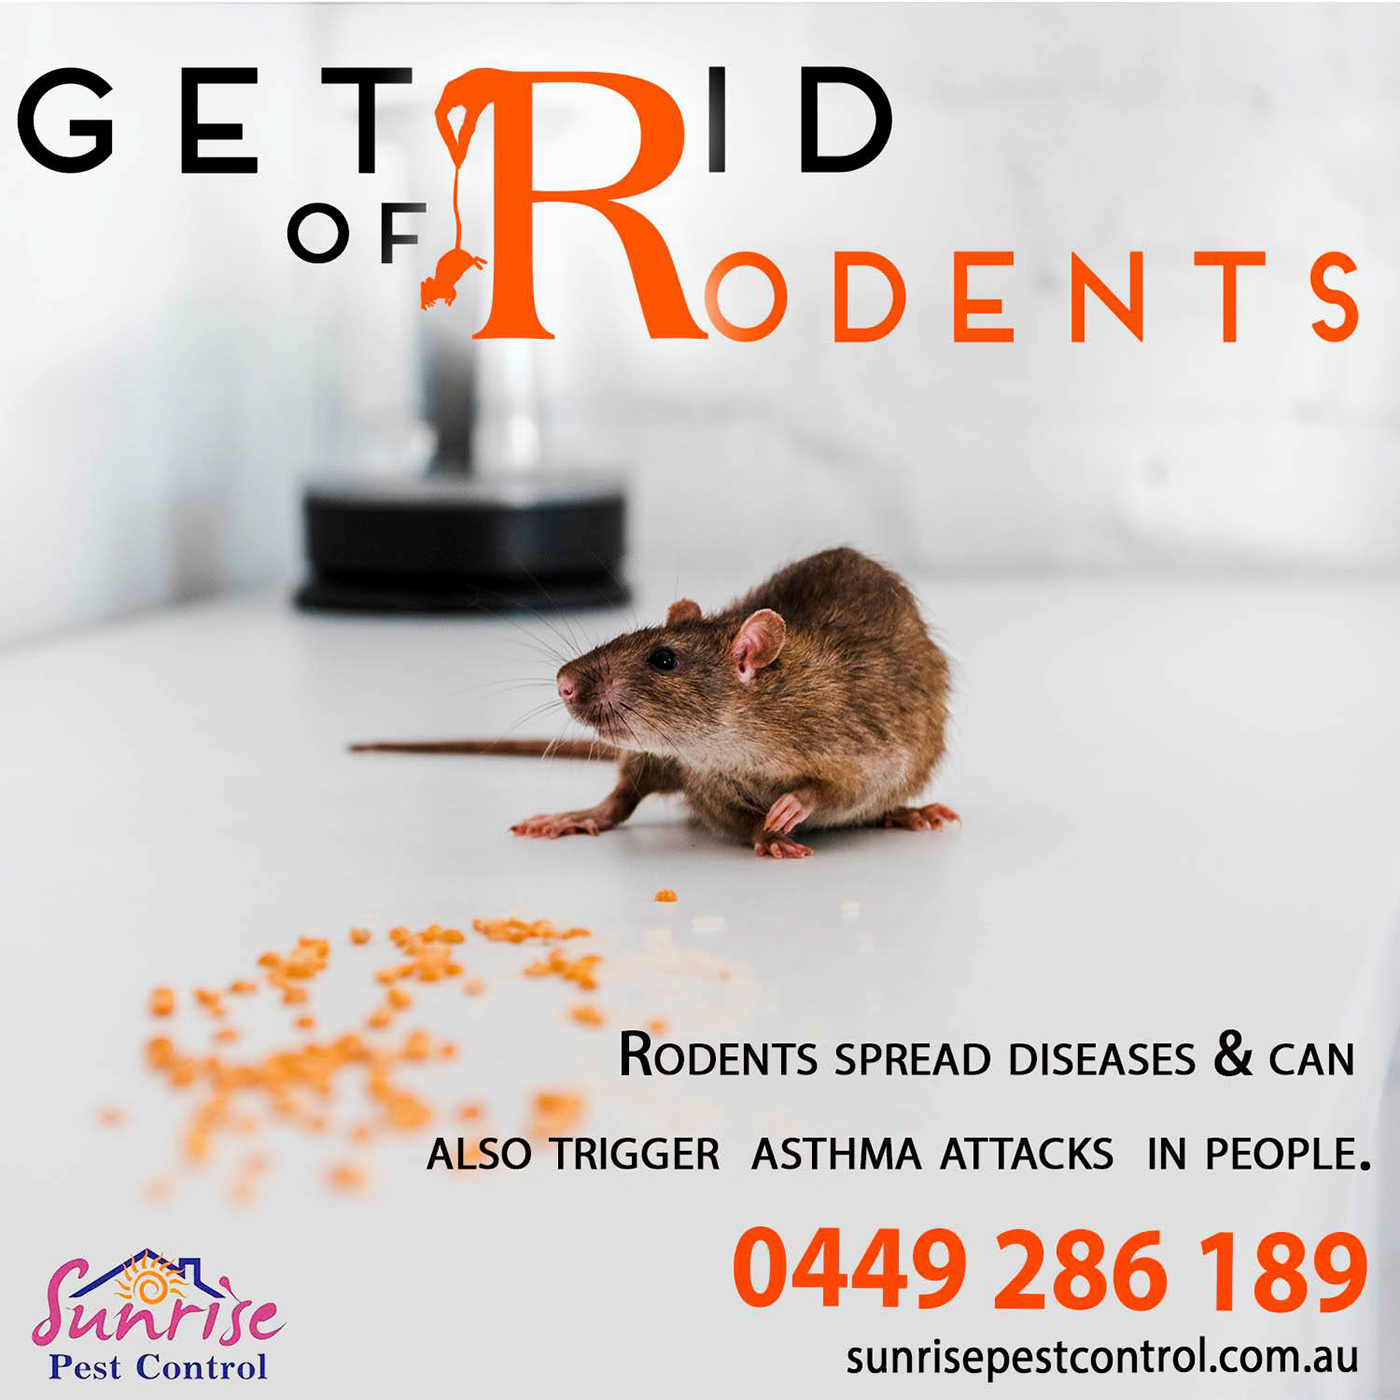 rodent control rodent Pest Control